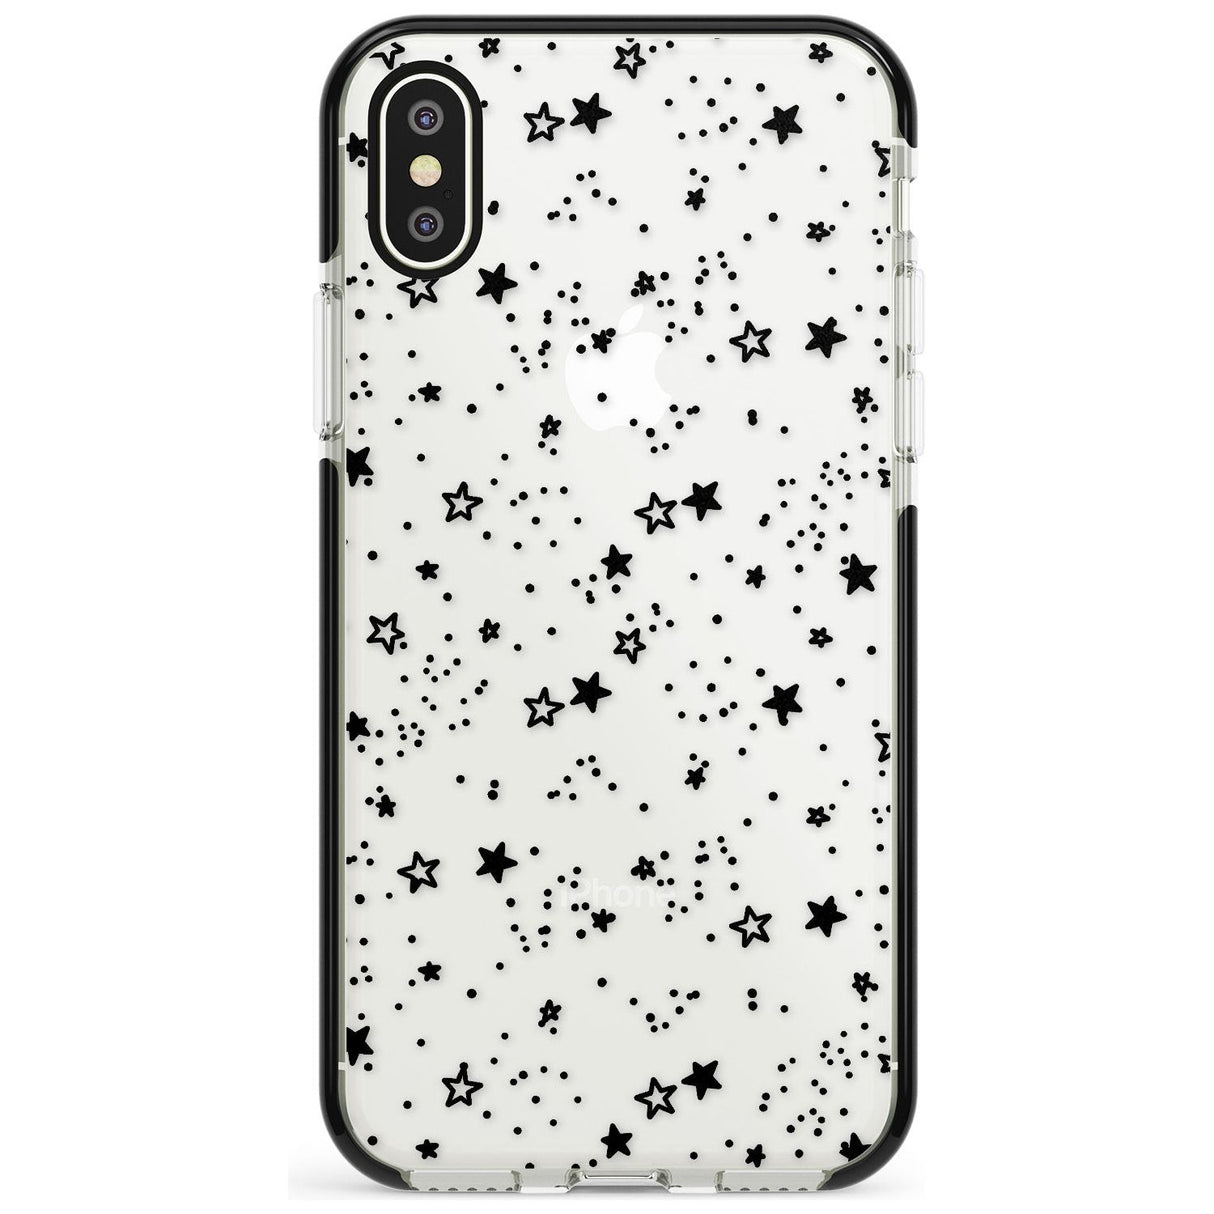 Solid Stars Black Impact Phone Case for iPhone X XS Max XR